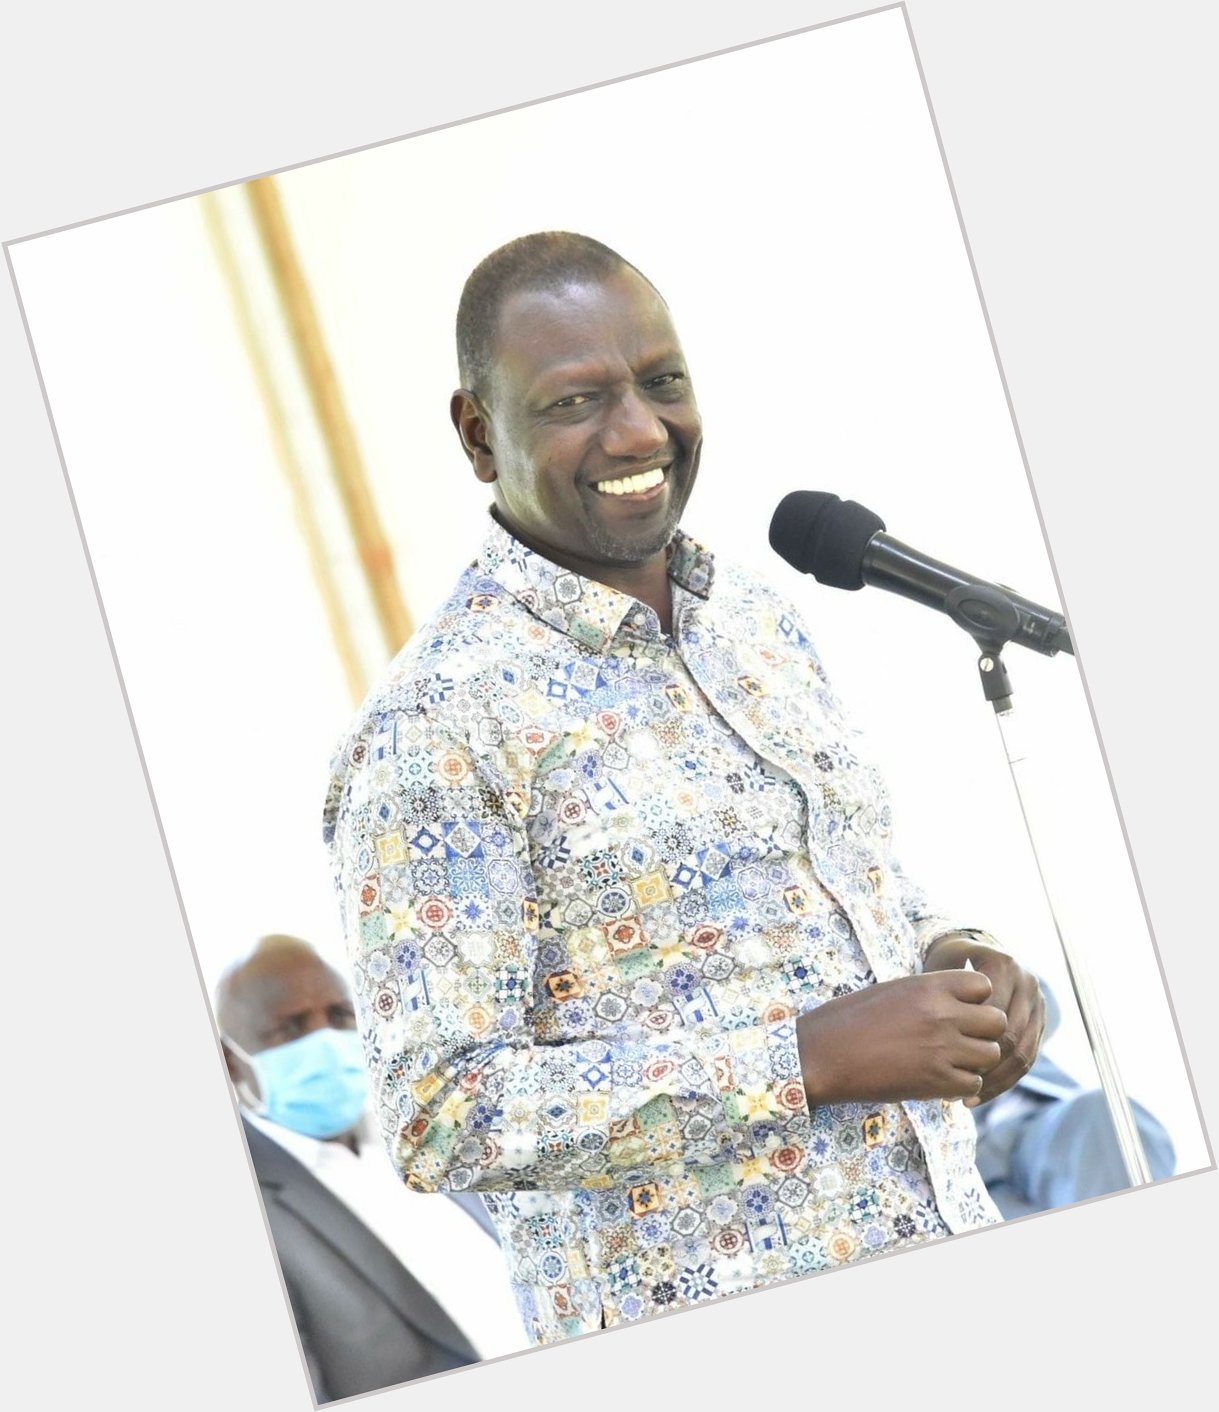 DP William Ruto is turning 54 today. Happy Birthday What is your message to 